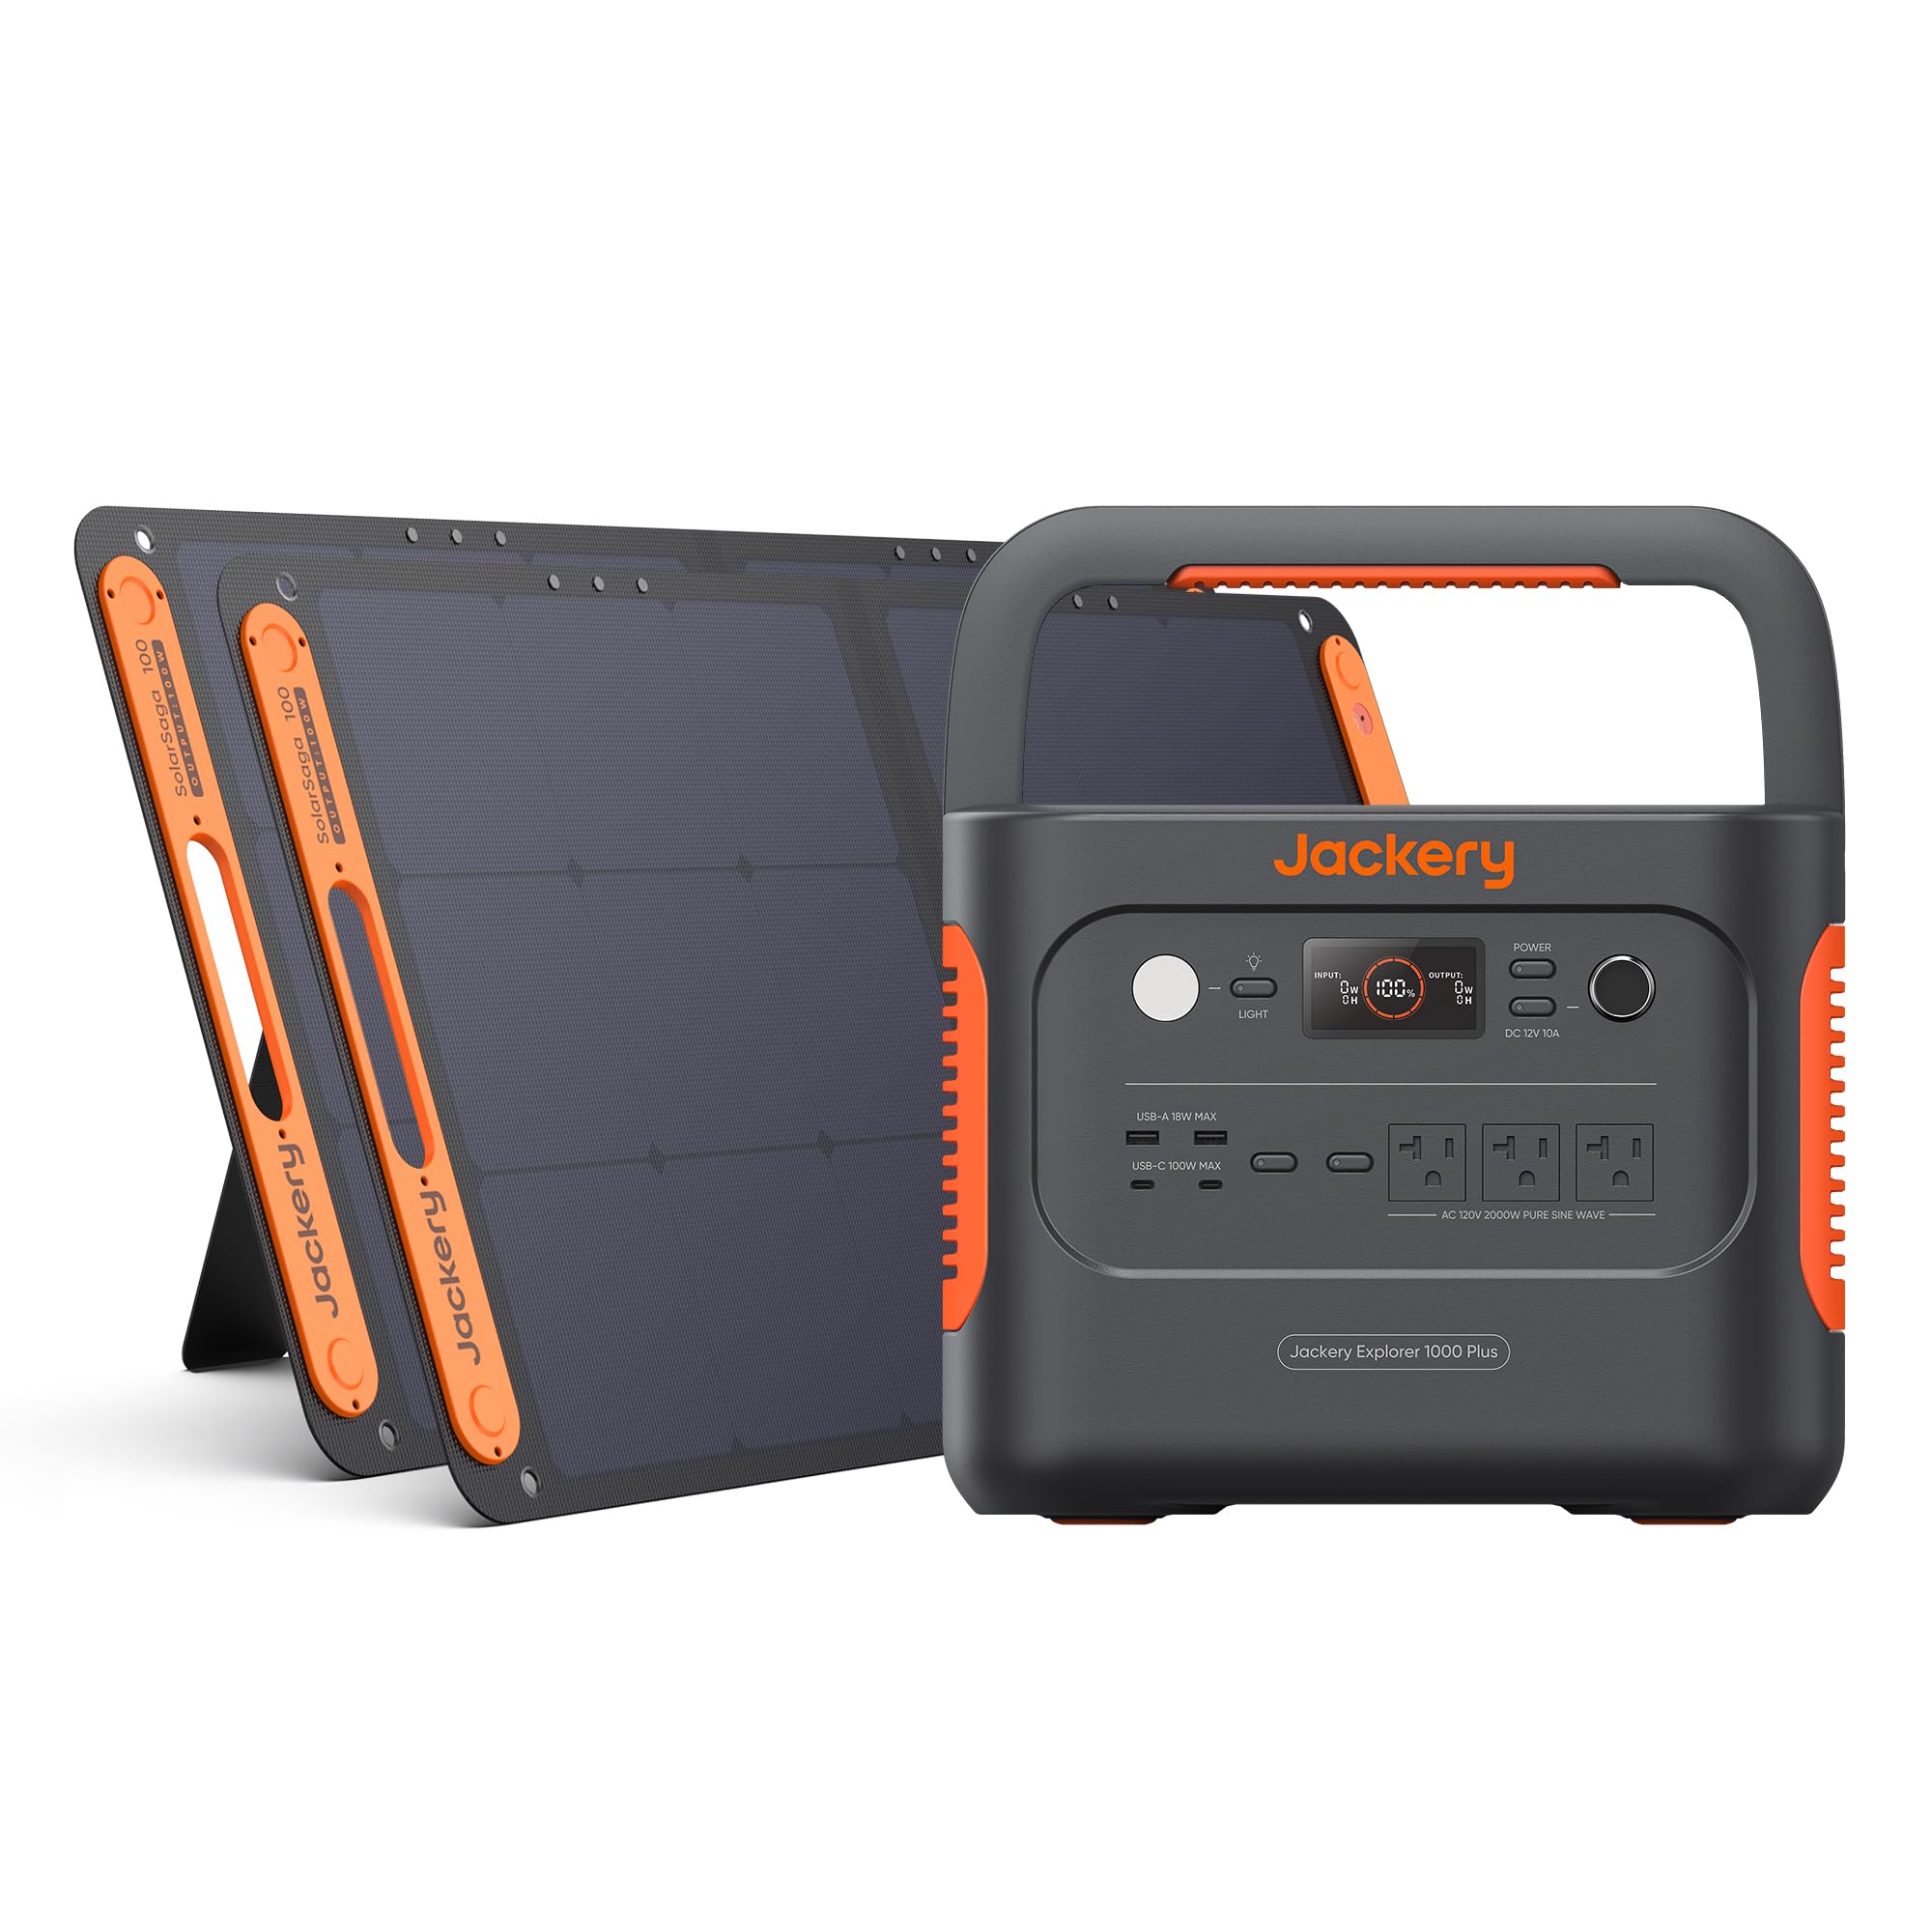 Jackery 1000 1264Wh Portable Power Station with 2x100W Solar Panels, 2000W Output $1249